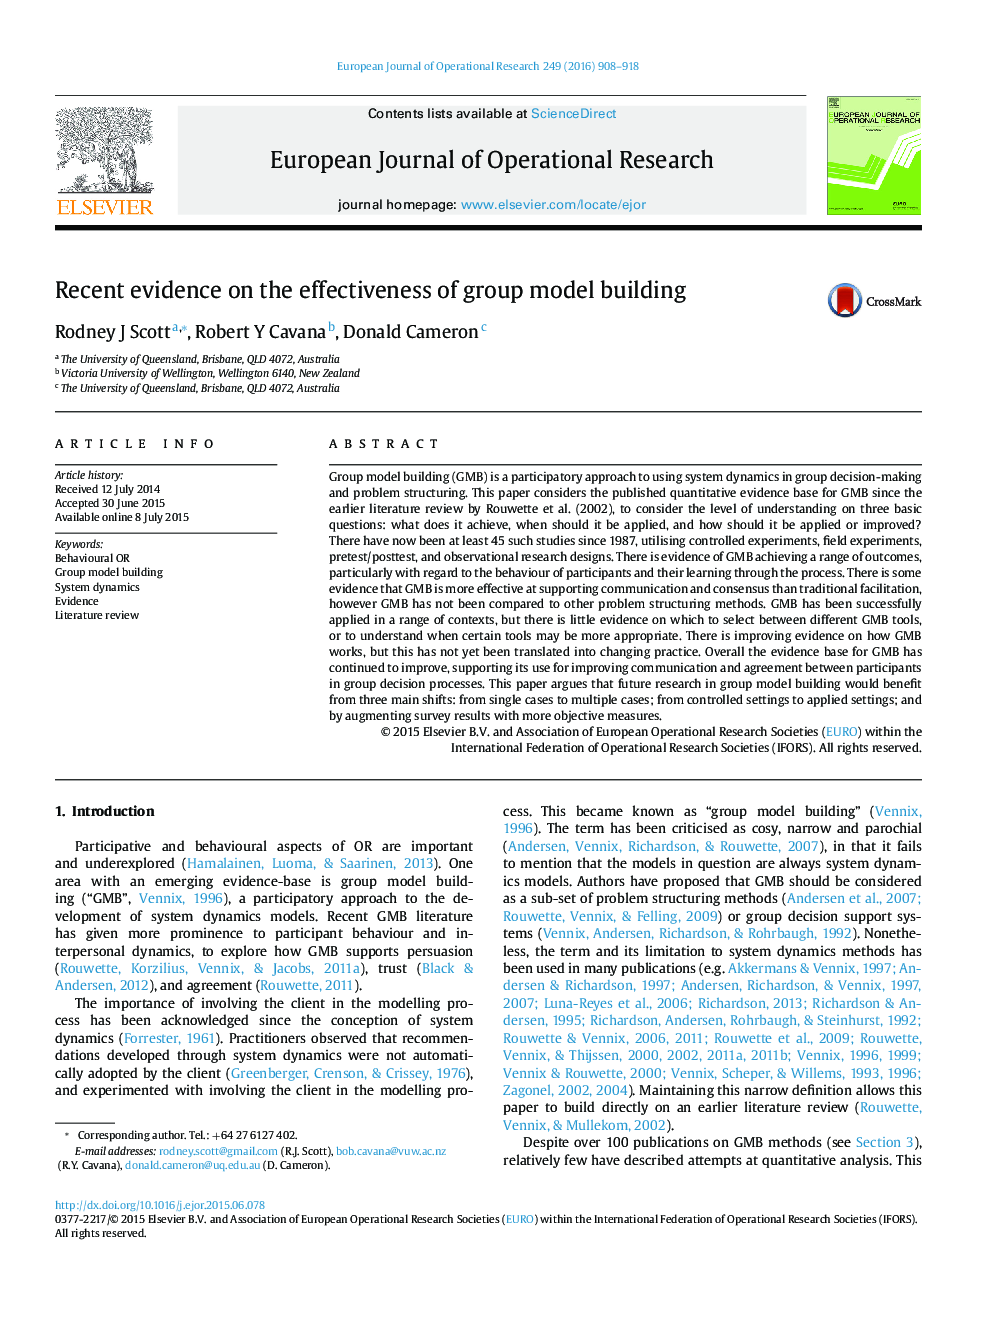 Recent evidence on the effectiveness of group model building